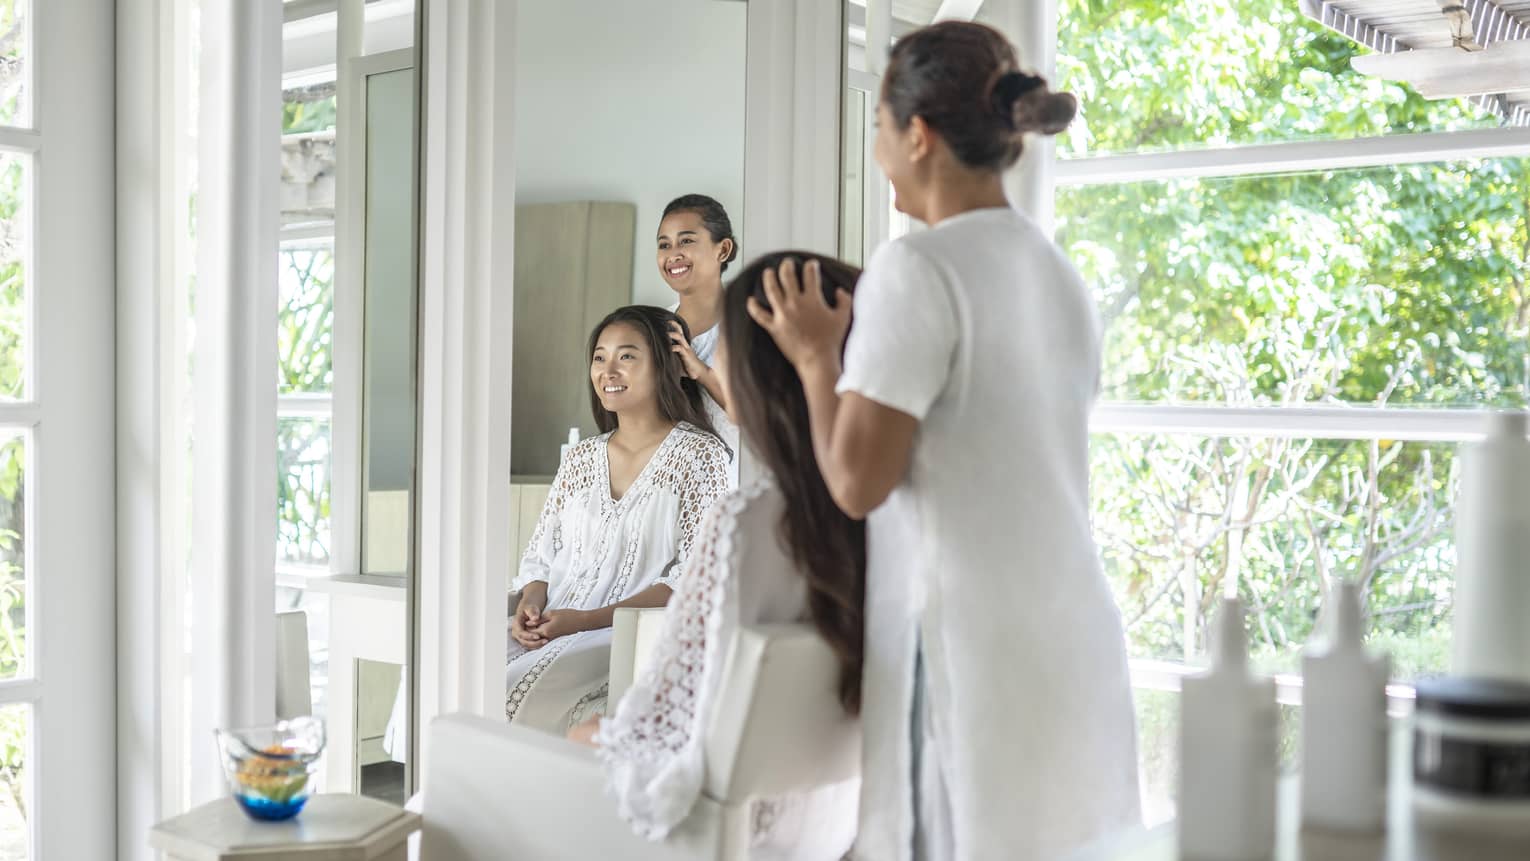 A four seasons guest gets her hair done while sitting in a white salon chair facing floor to ceiling windows revealing greenery just outside the salon